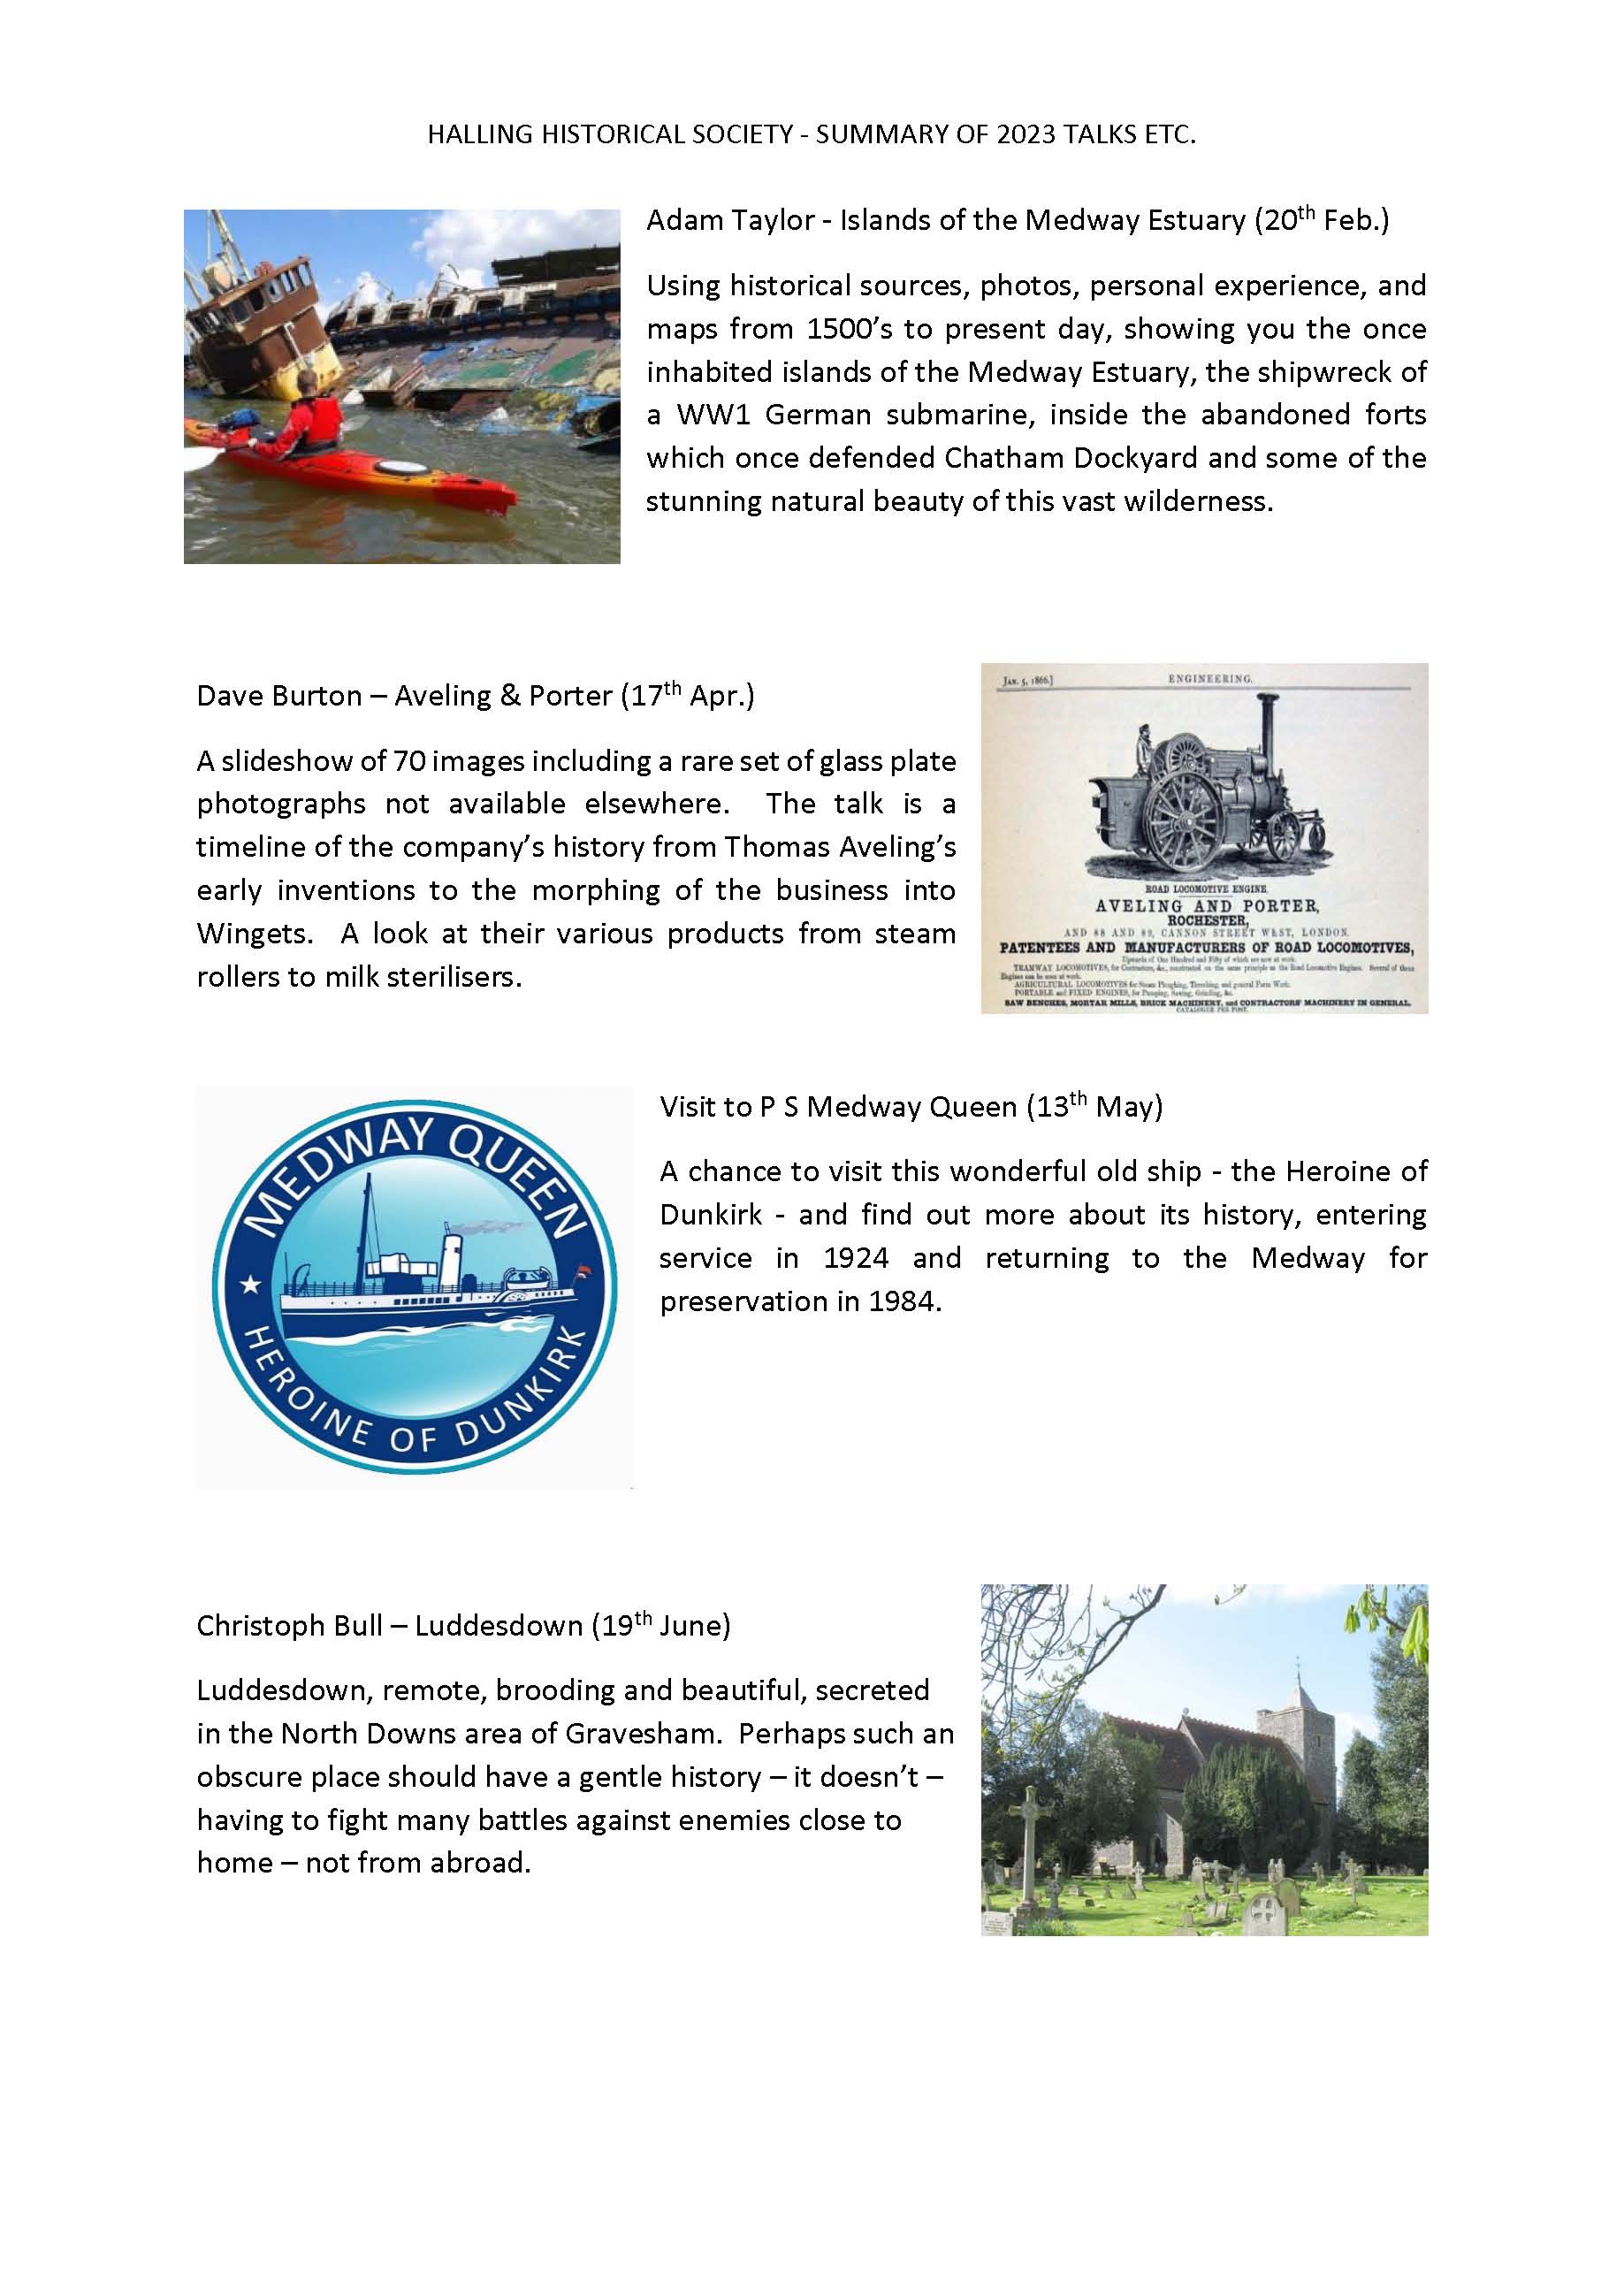 Halling Historical Society 2023 Archive